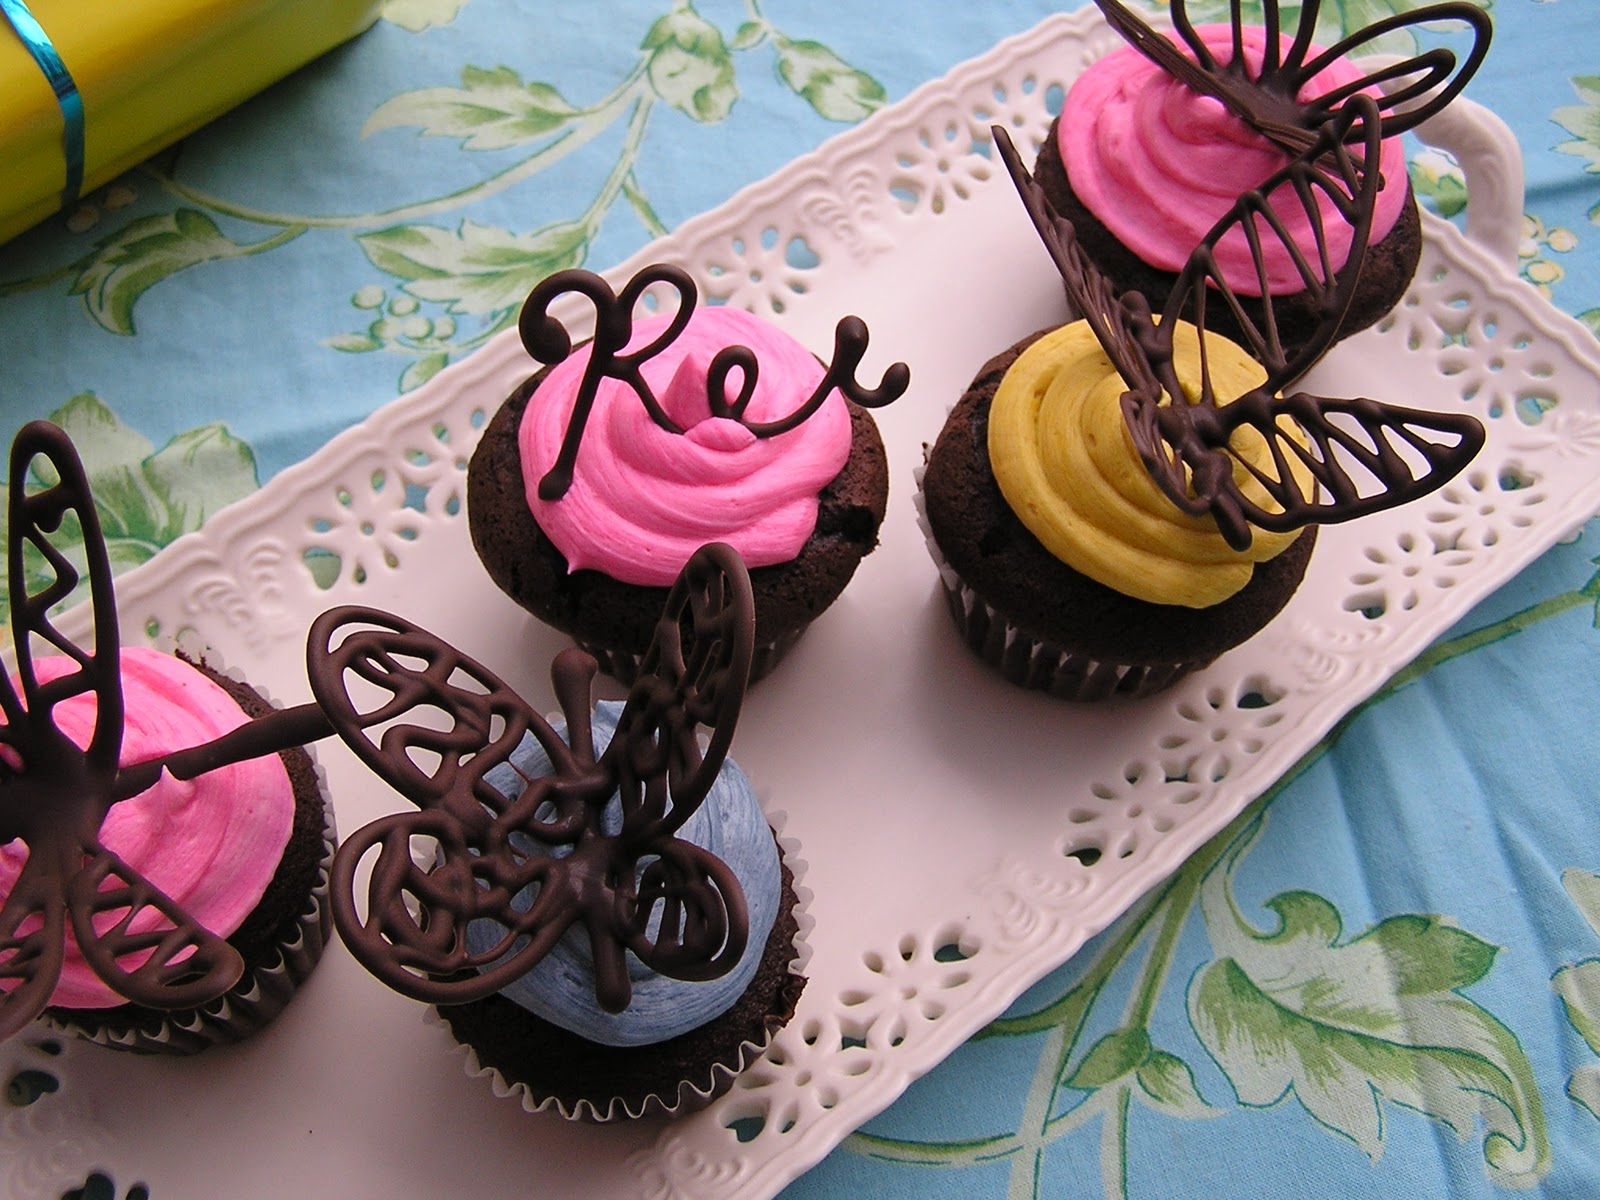 cool cake decorations Learn to make easy, fast, and beautiful chocolate butterflies after 